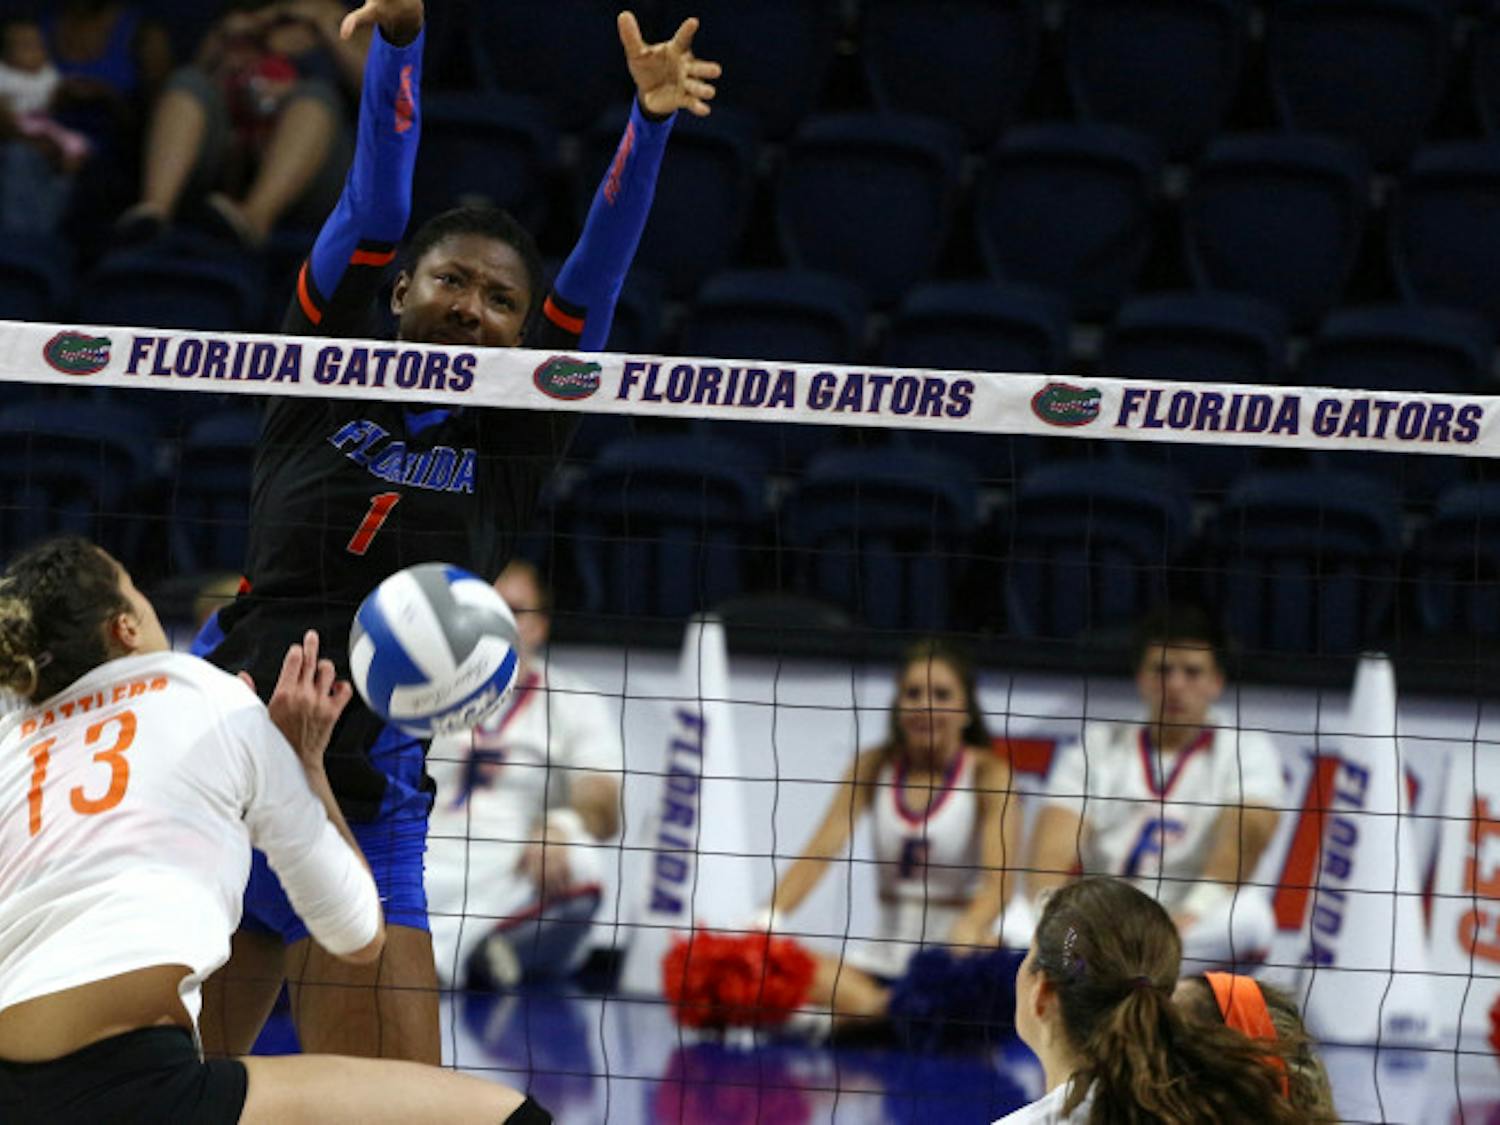 Rhamat Alhassan jumps up to block the ball during Florida's 3-0 win against Florida A&amp;M on Sept. 15, 2017, at the O'Connell Center.